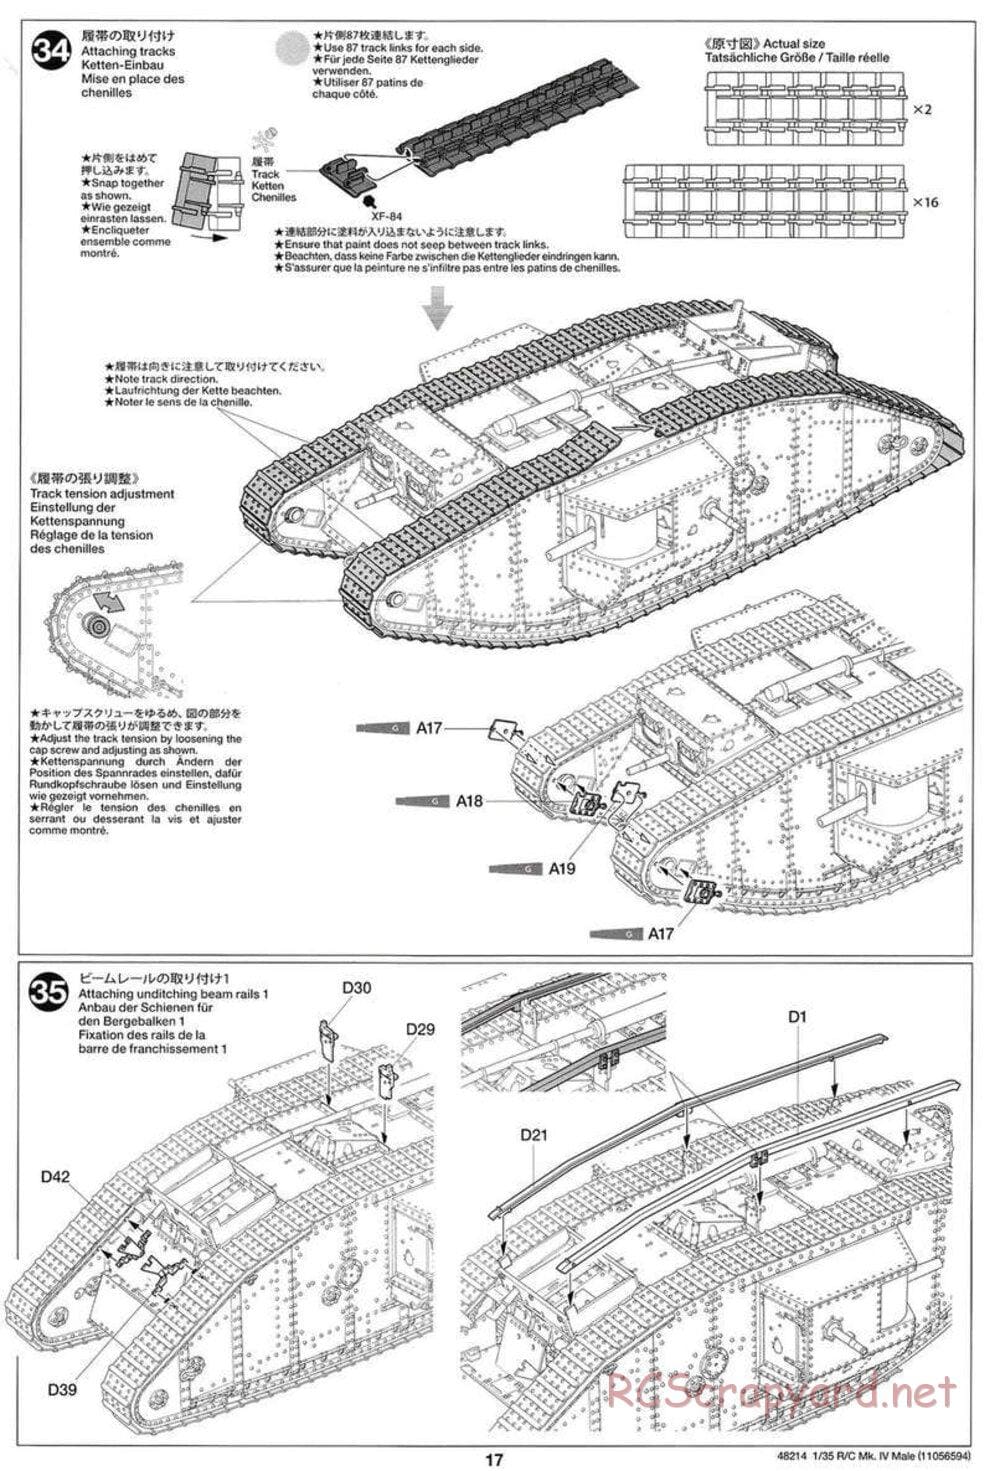 Tamiya - WWI British Tank Mark IV Male - 1/35 Scale Chassis - Manual - Page 17